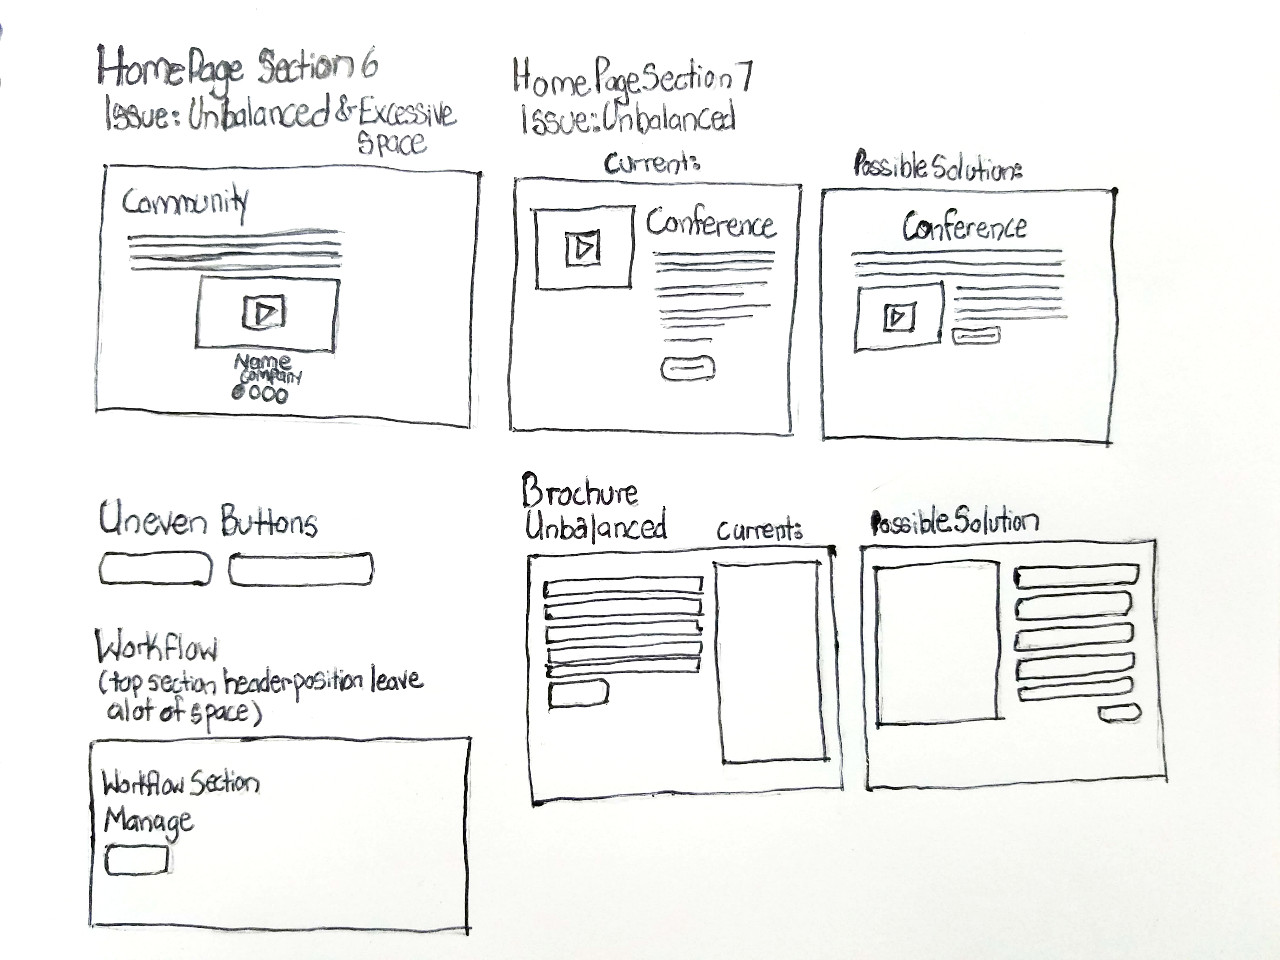 Sketches of issues found in a website audit